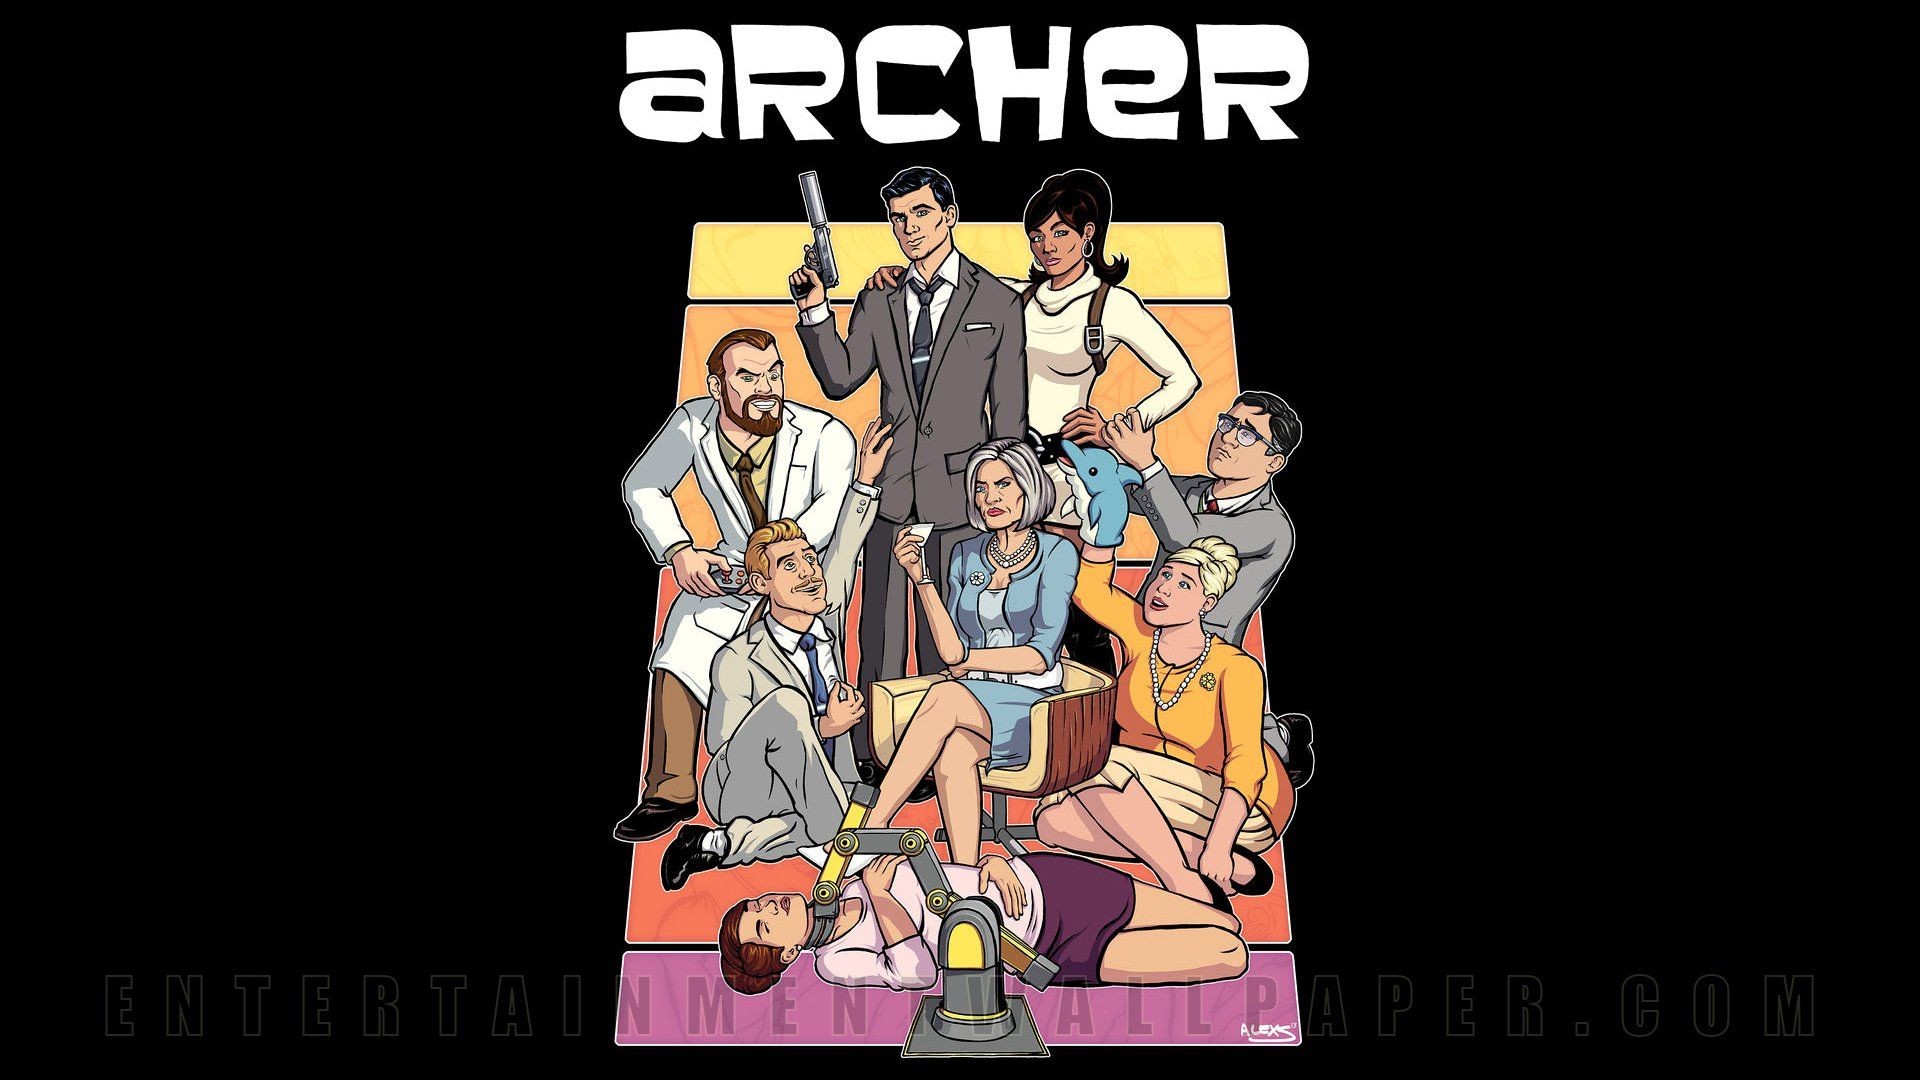 1920x1080 Download Hilarious Archer Wallpapers HD for Android Appszoom 1920Ã1080 Archer  Wallpapers (30 Wallpapers) | Adorable Wallpapers